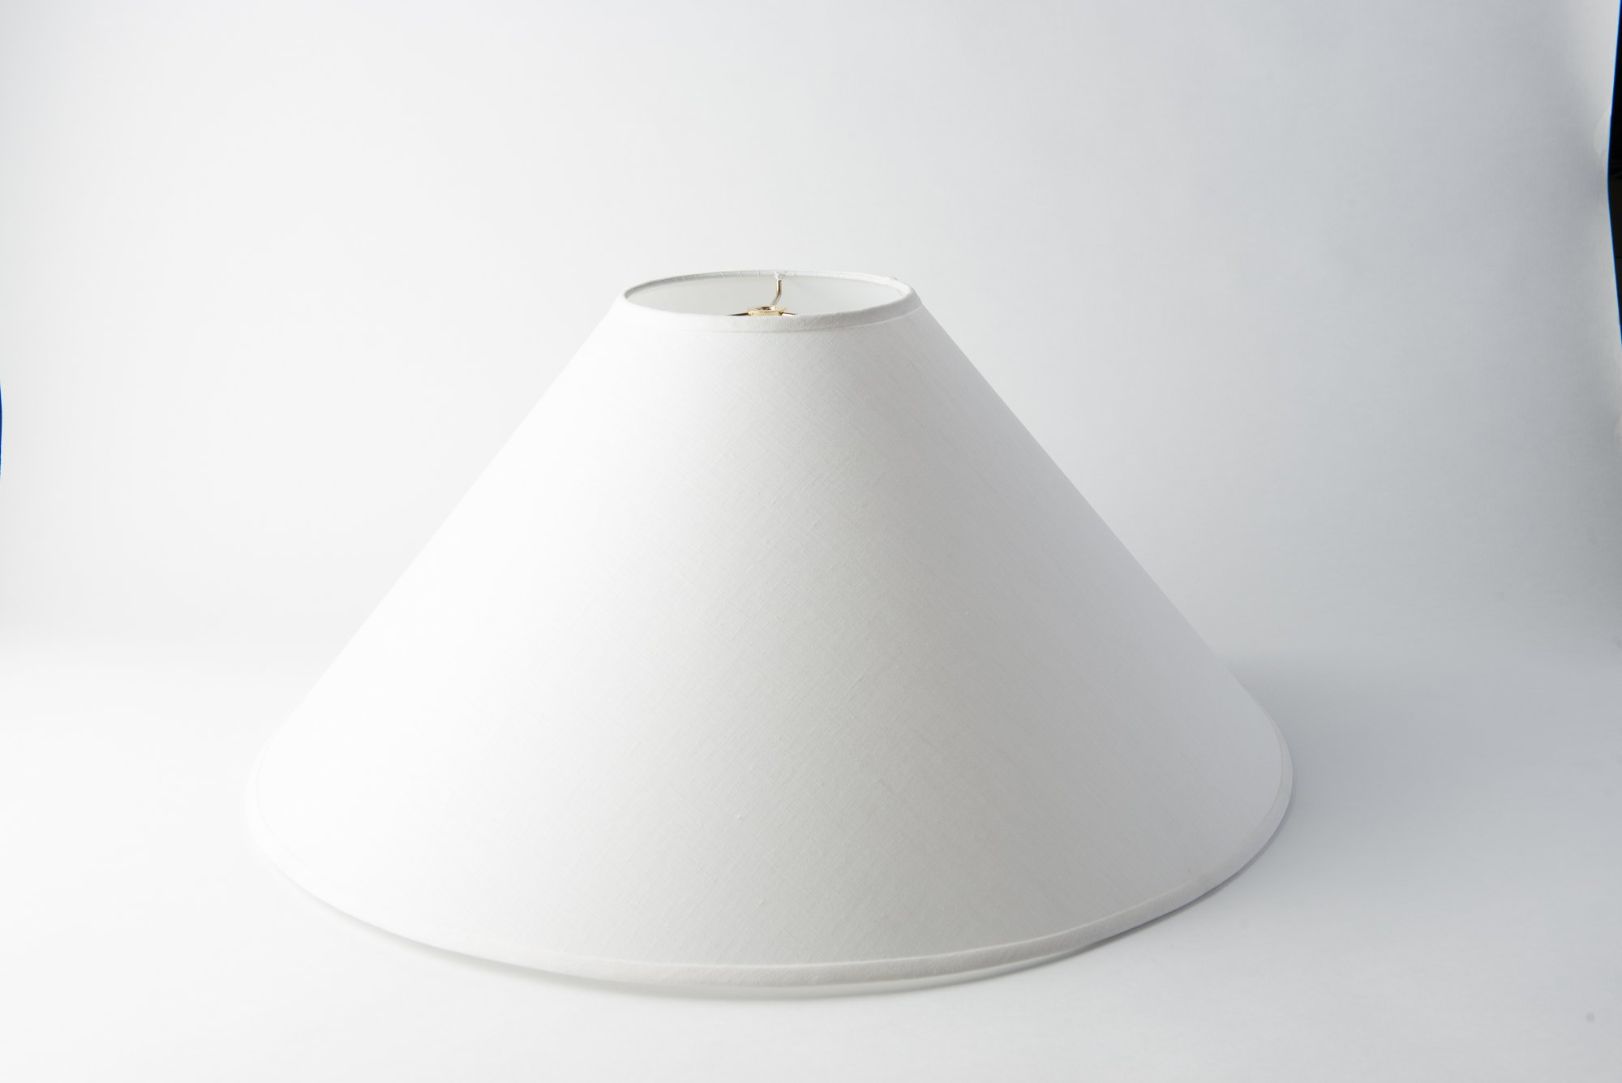 https://www.hotel-lamps.com/resources/assets/images/product_images/Coolie_white_linen_6fbaaa49-9ec6-4646-864b-05c0c3488db6.jpg